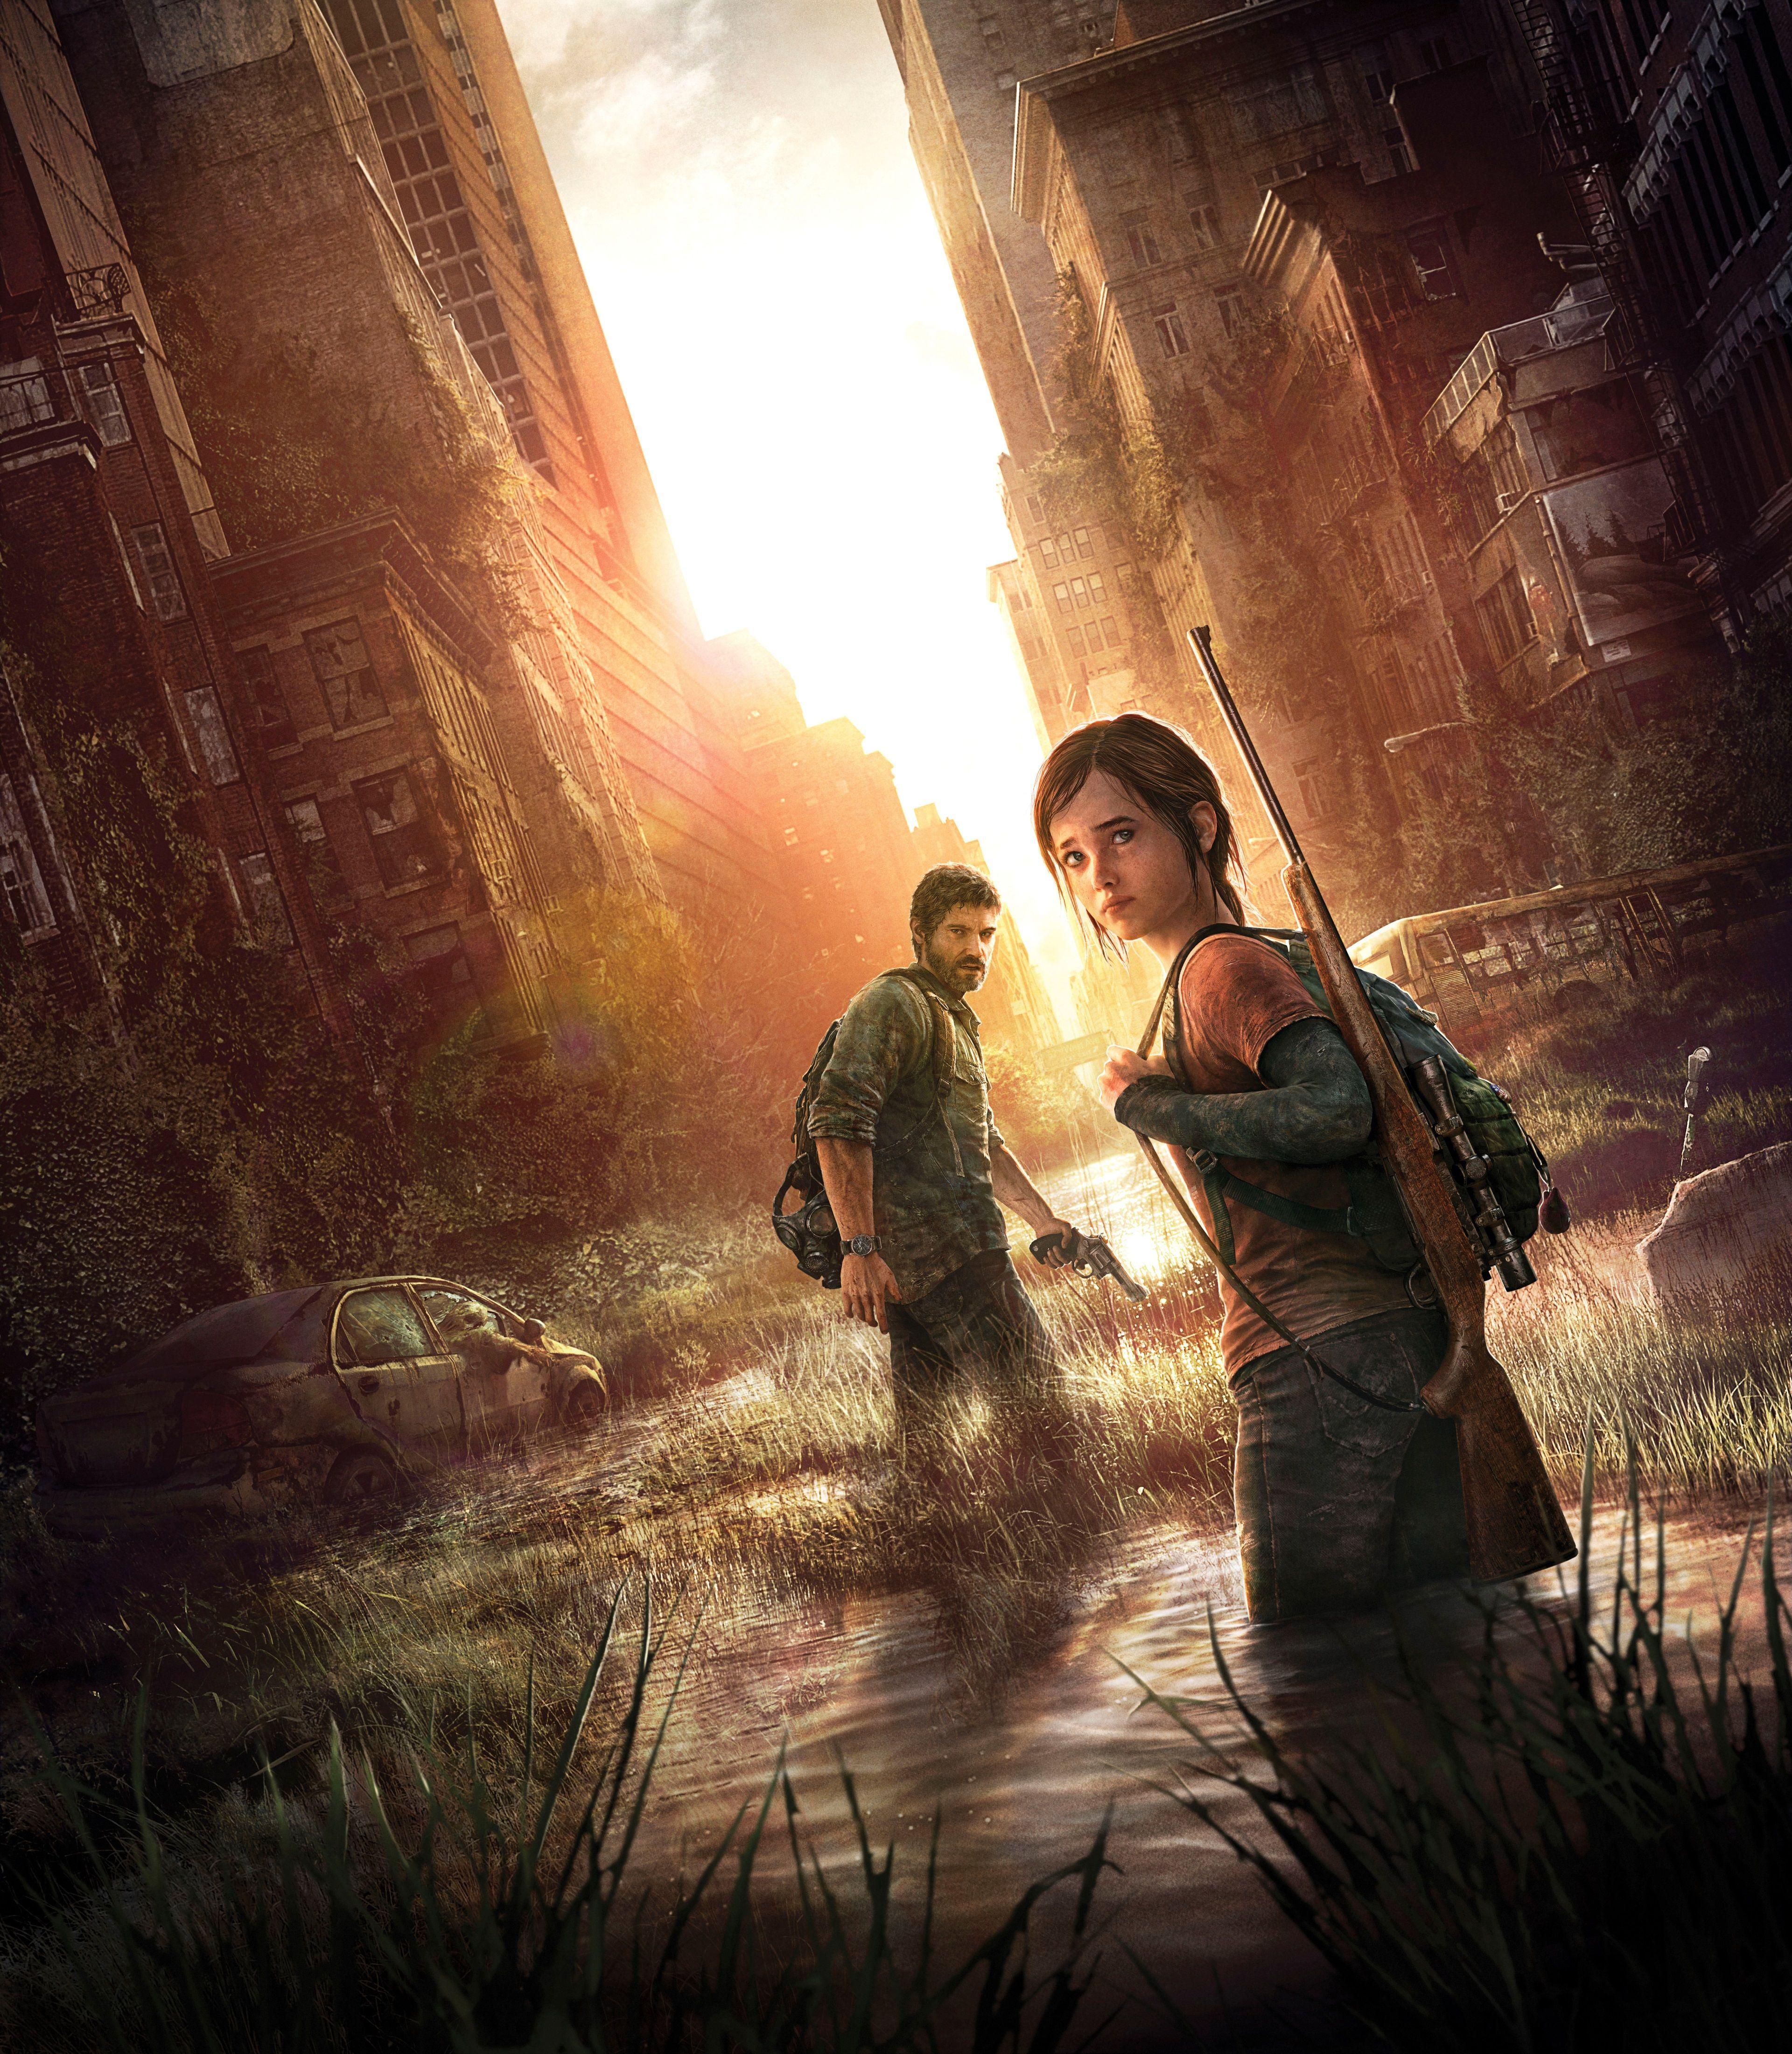 For anyone who wants a slick and minimal Fireflies iPhone wallpaper here  you go  rthelastofus